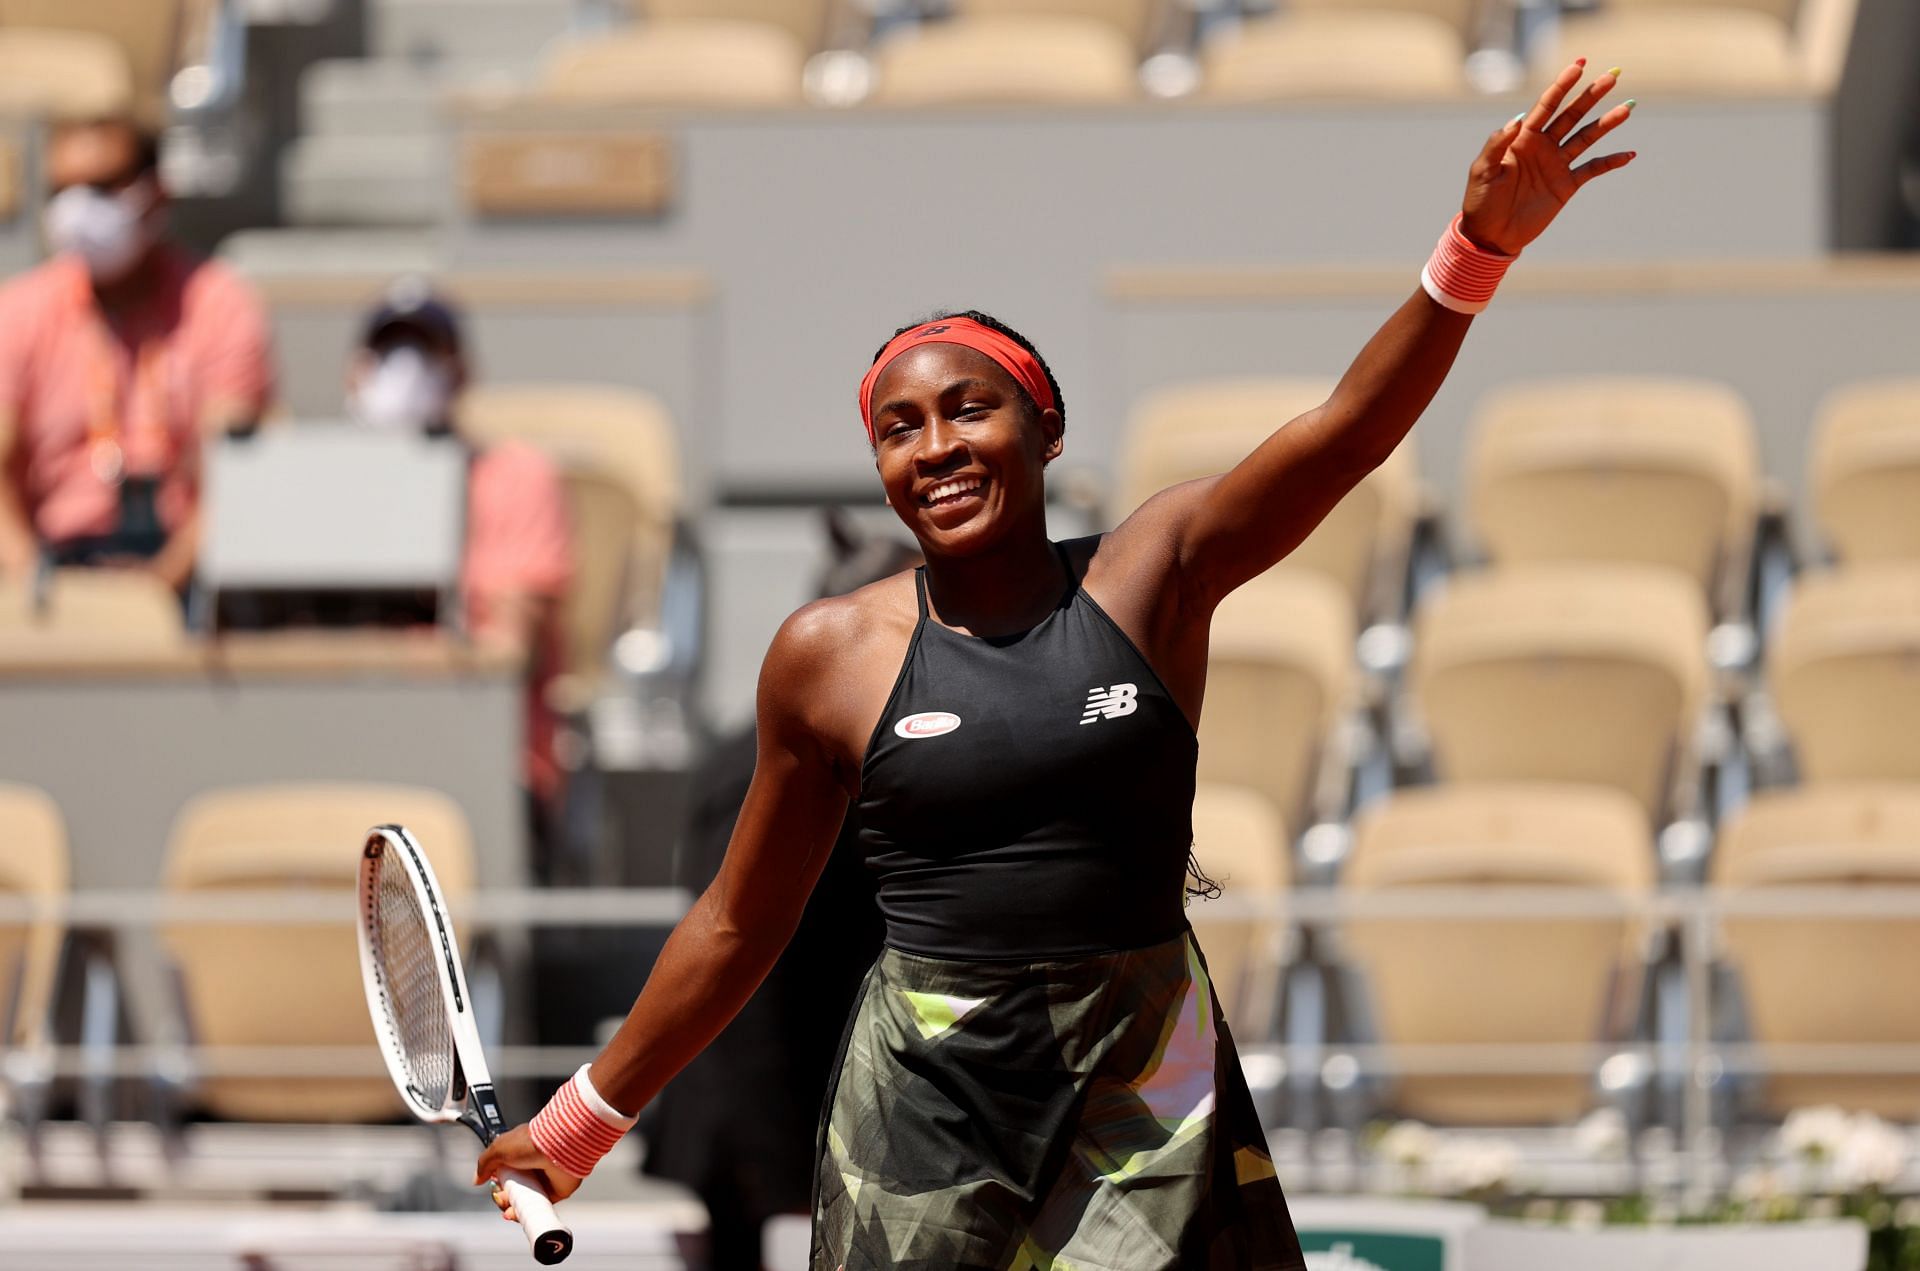 Coco Gauff and Taylor Townsend also took part in a Tortilla Slap challenge at the Atlanta Open